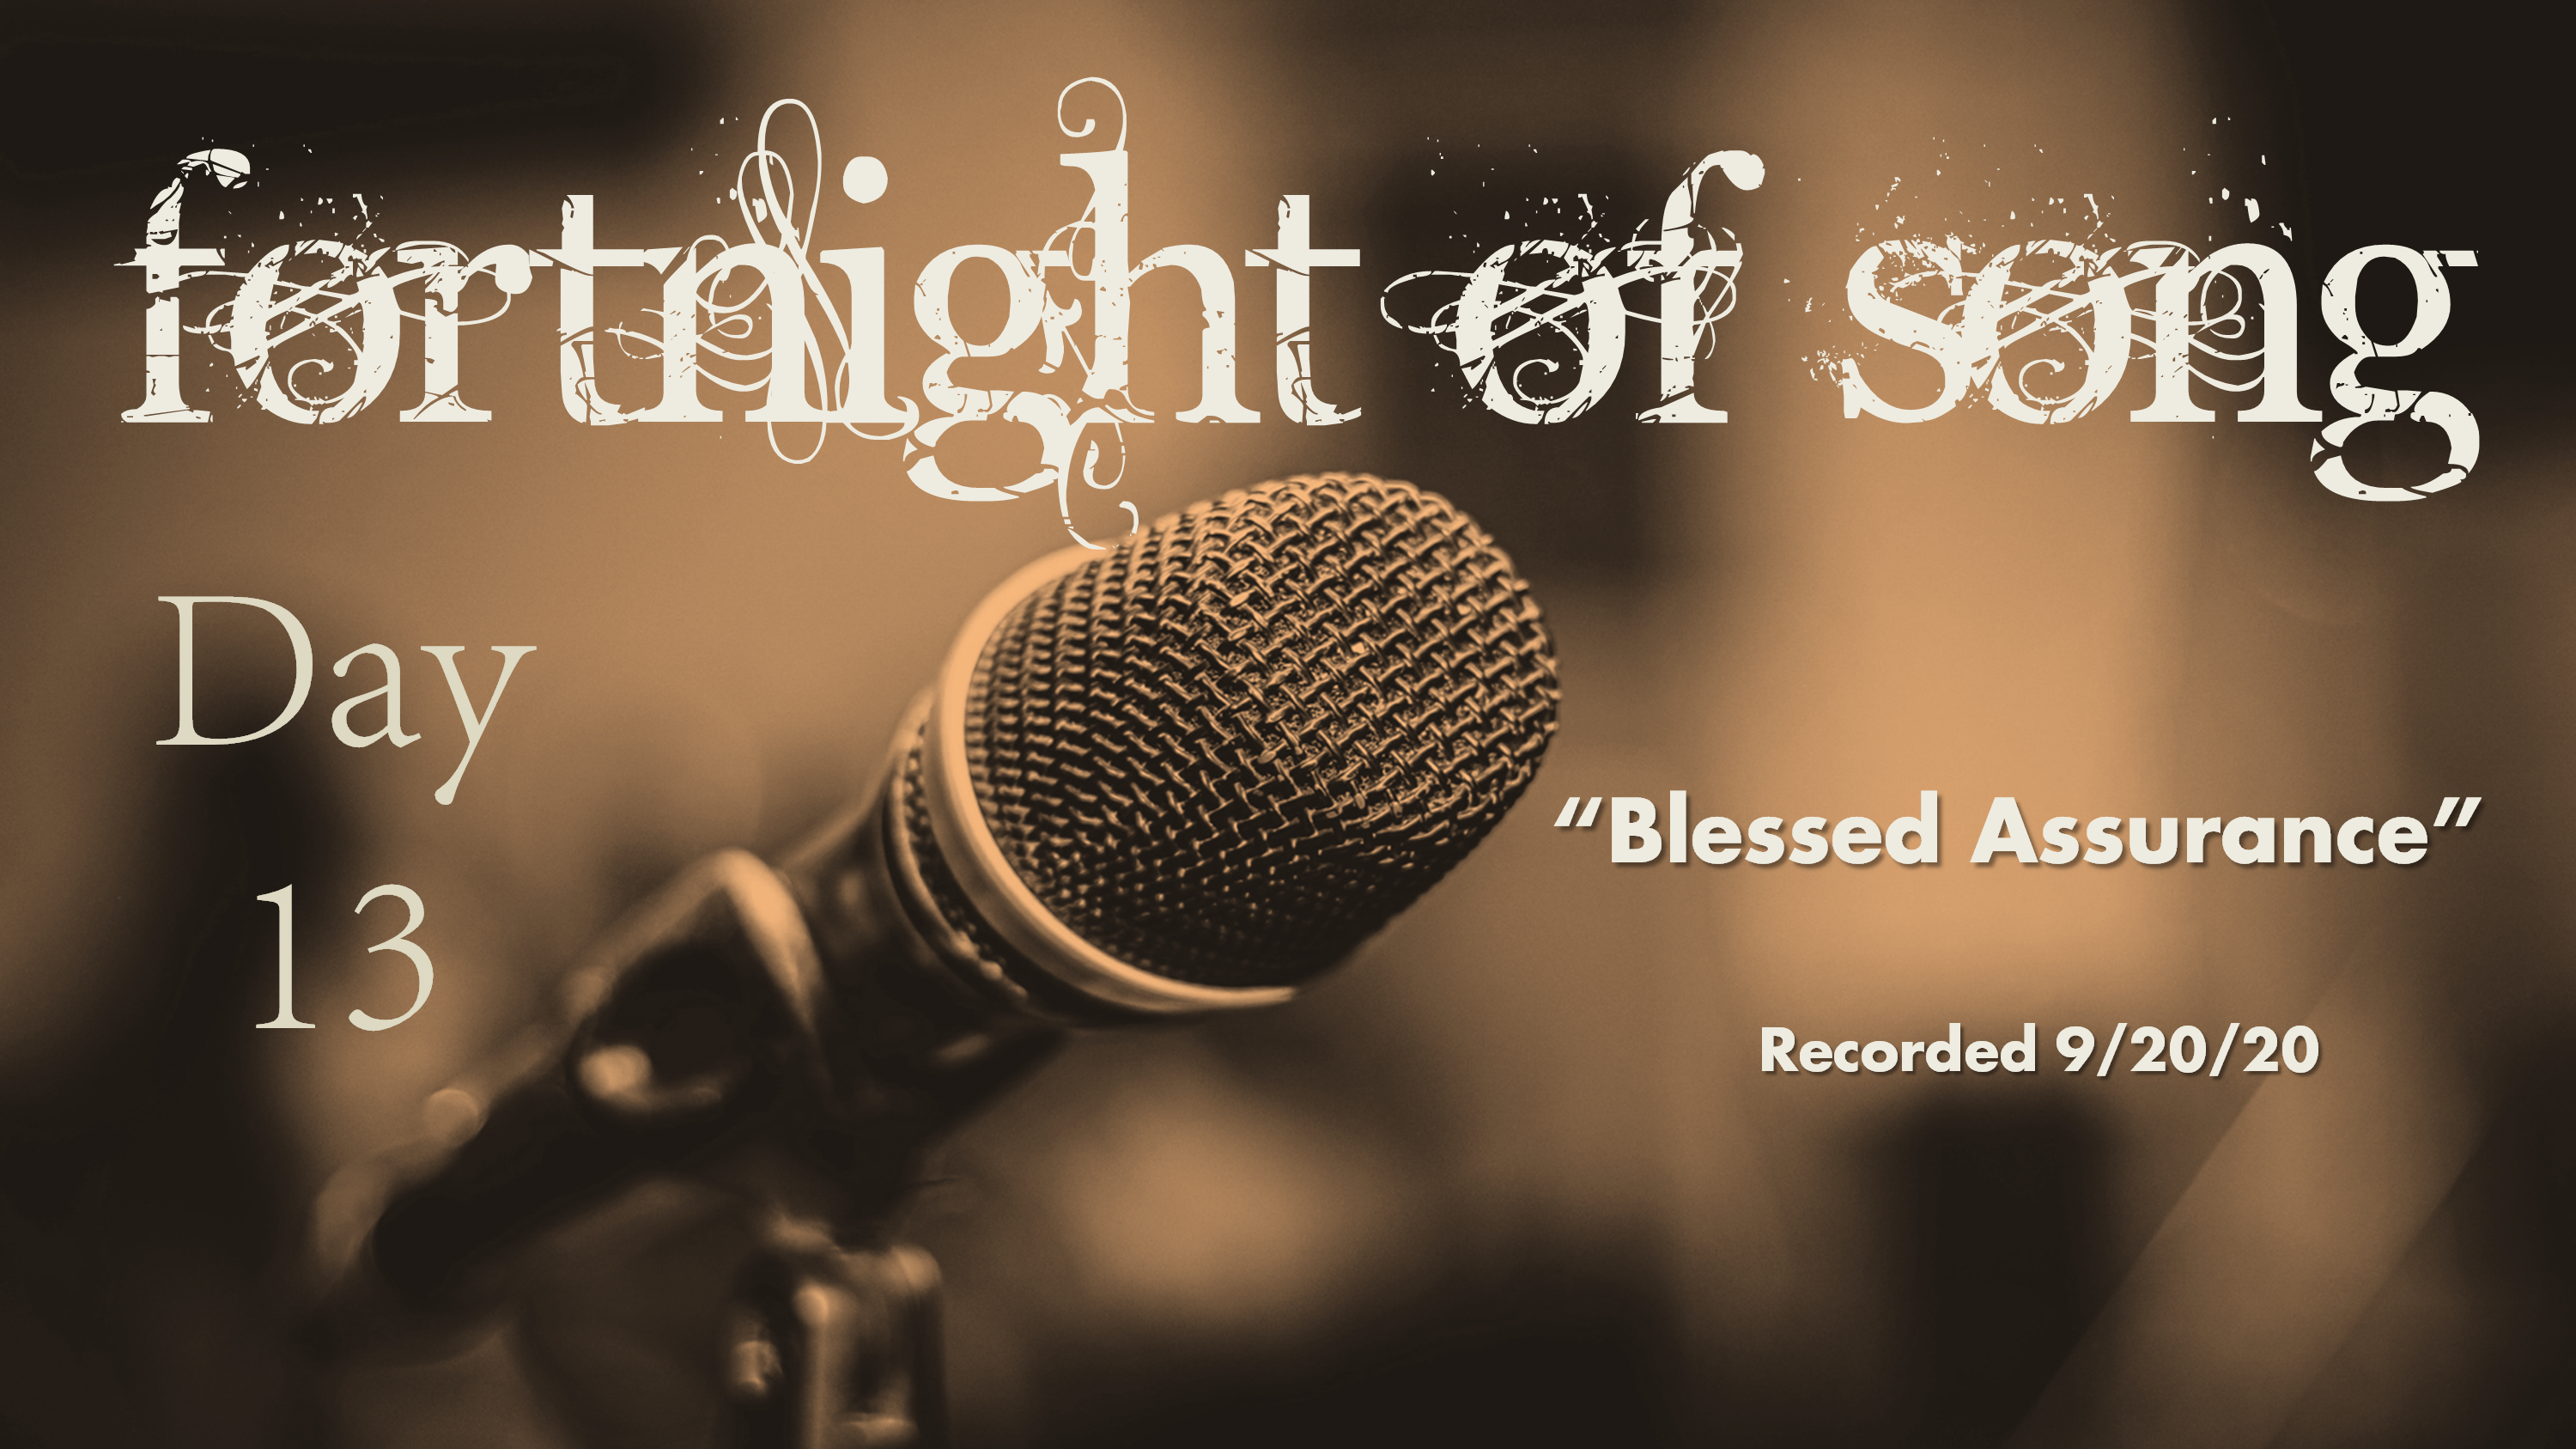 Fortnight of Song Day 13 - "Blessed Assurance"